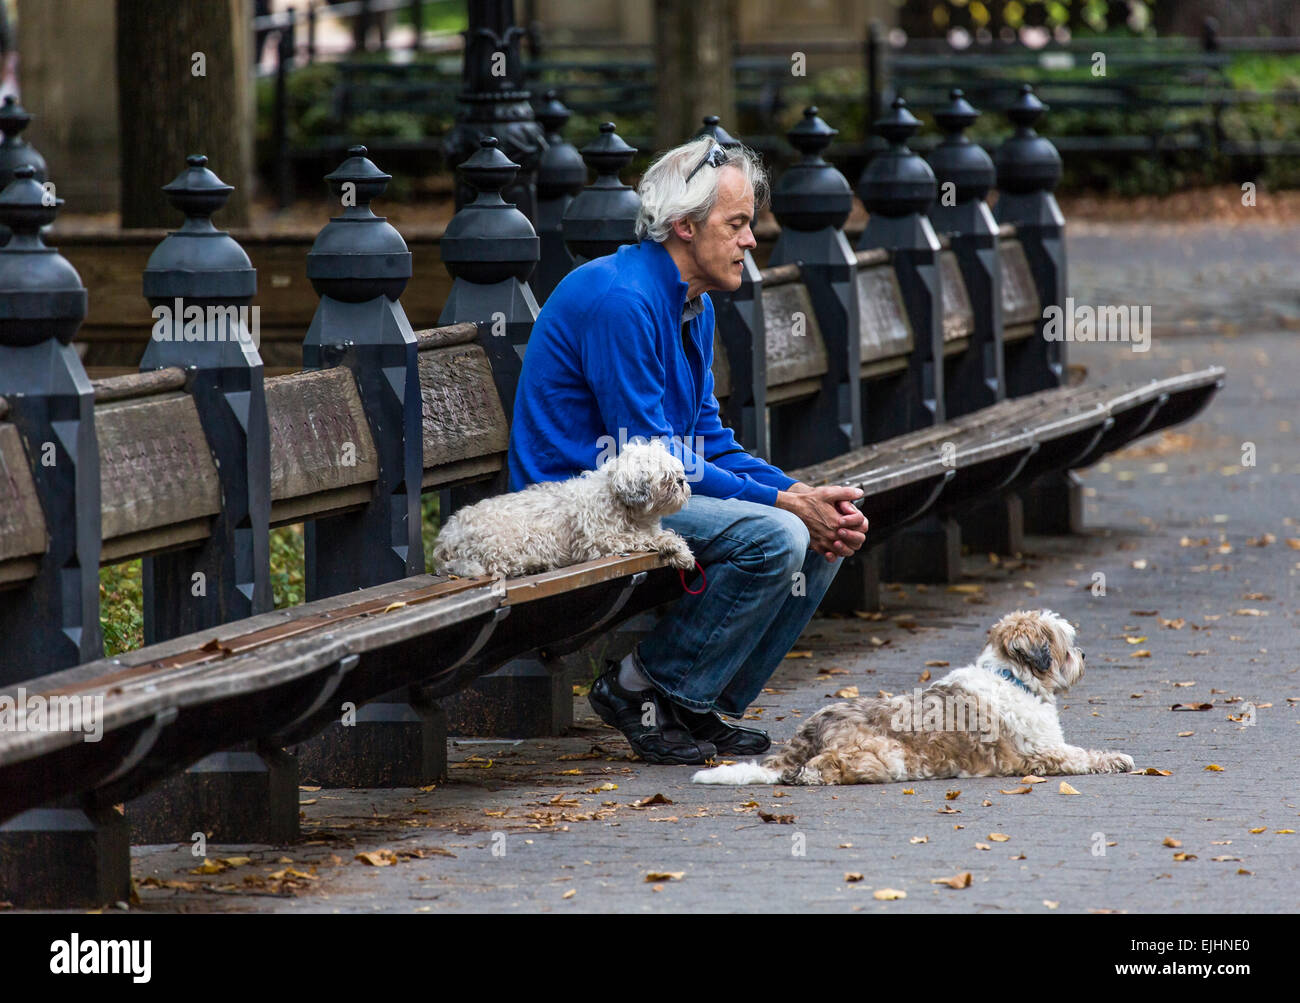 Man on bench with two dogs, Central Park, New York, USA Stock Photo